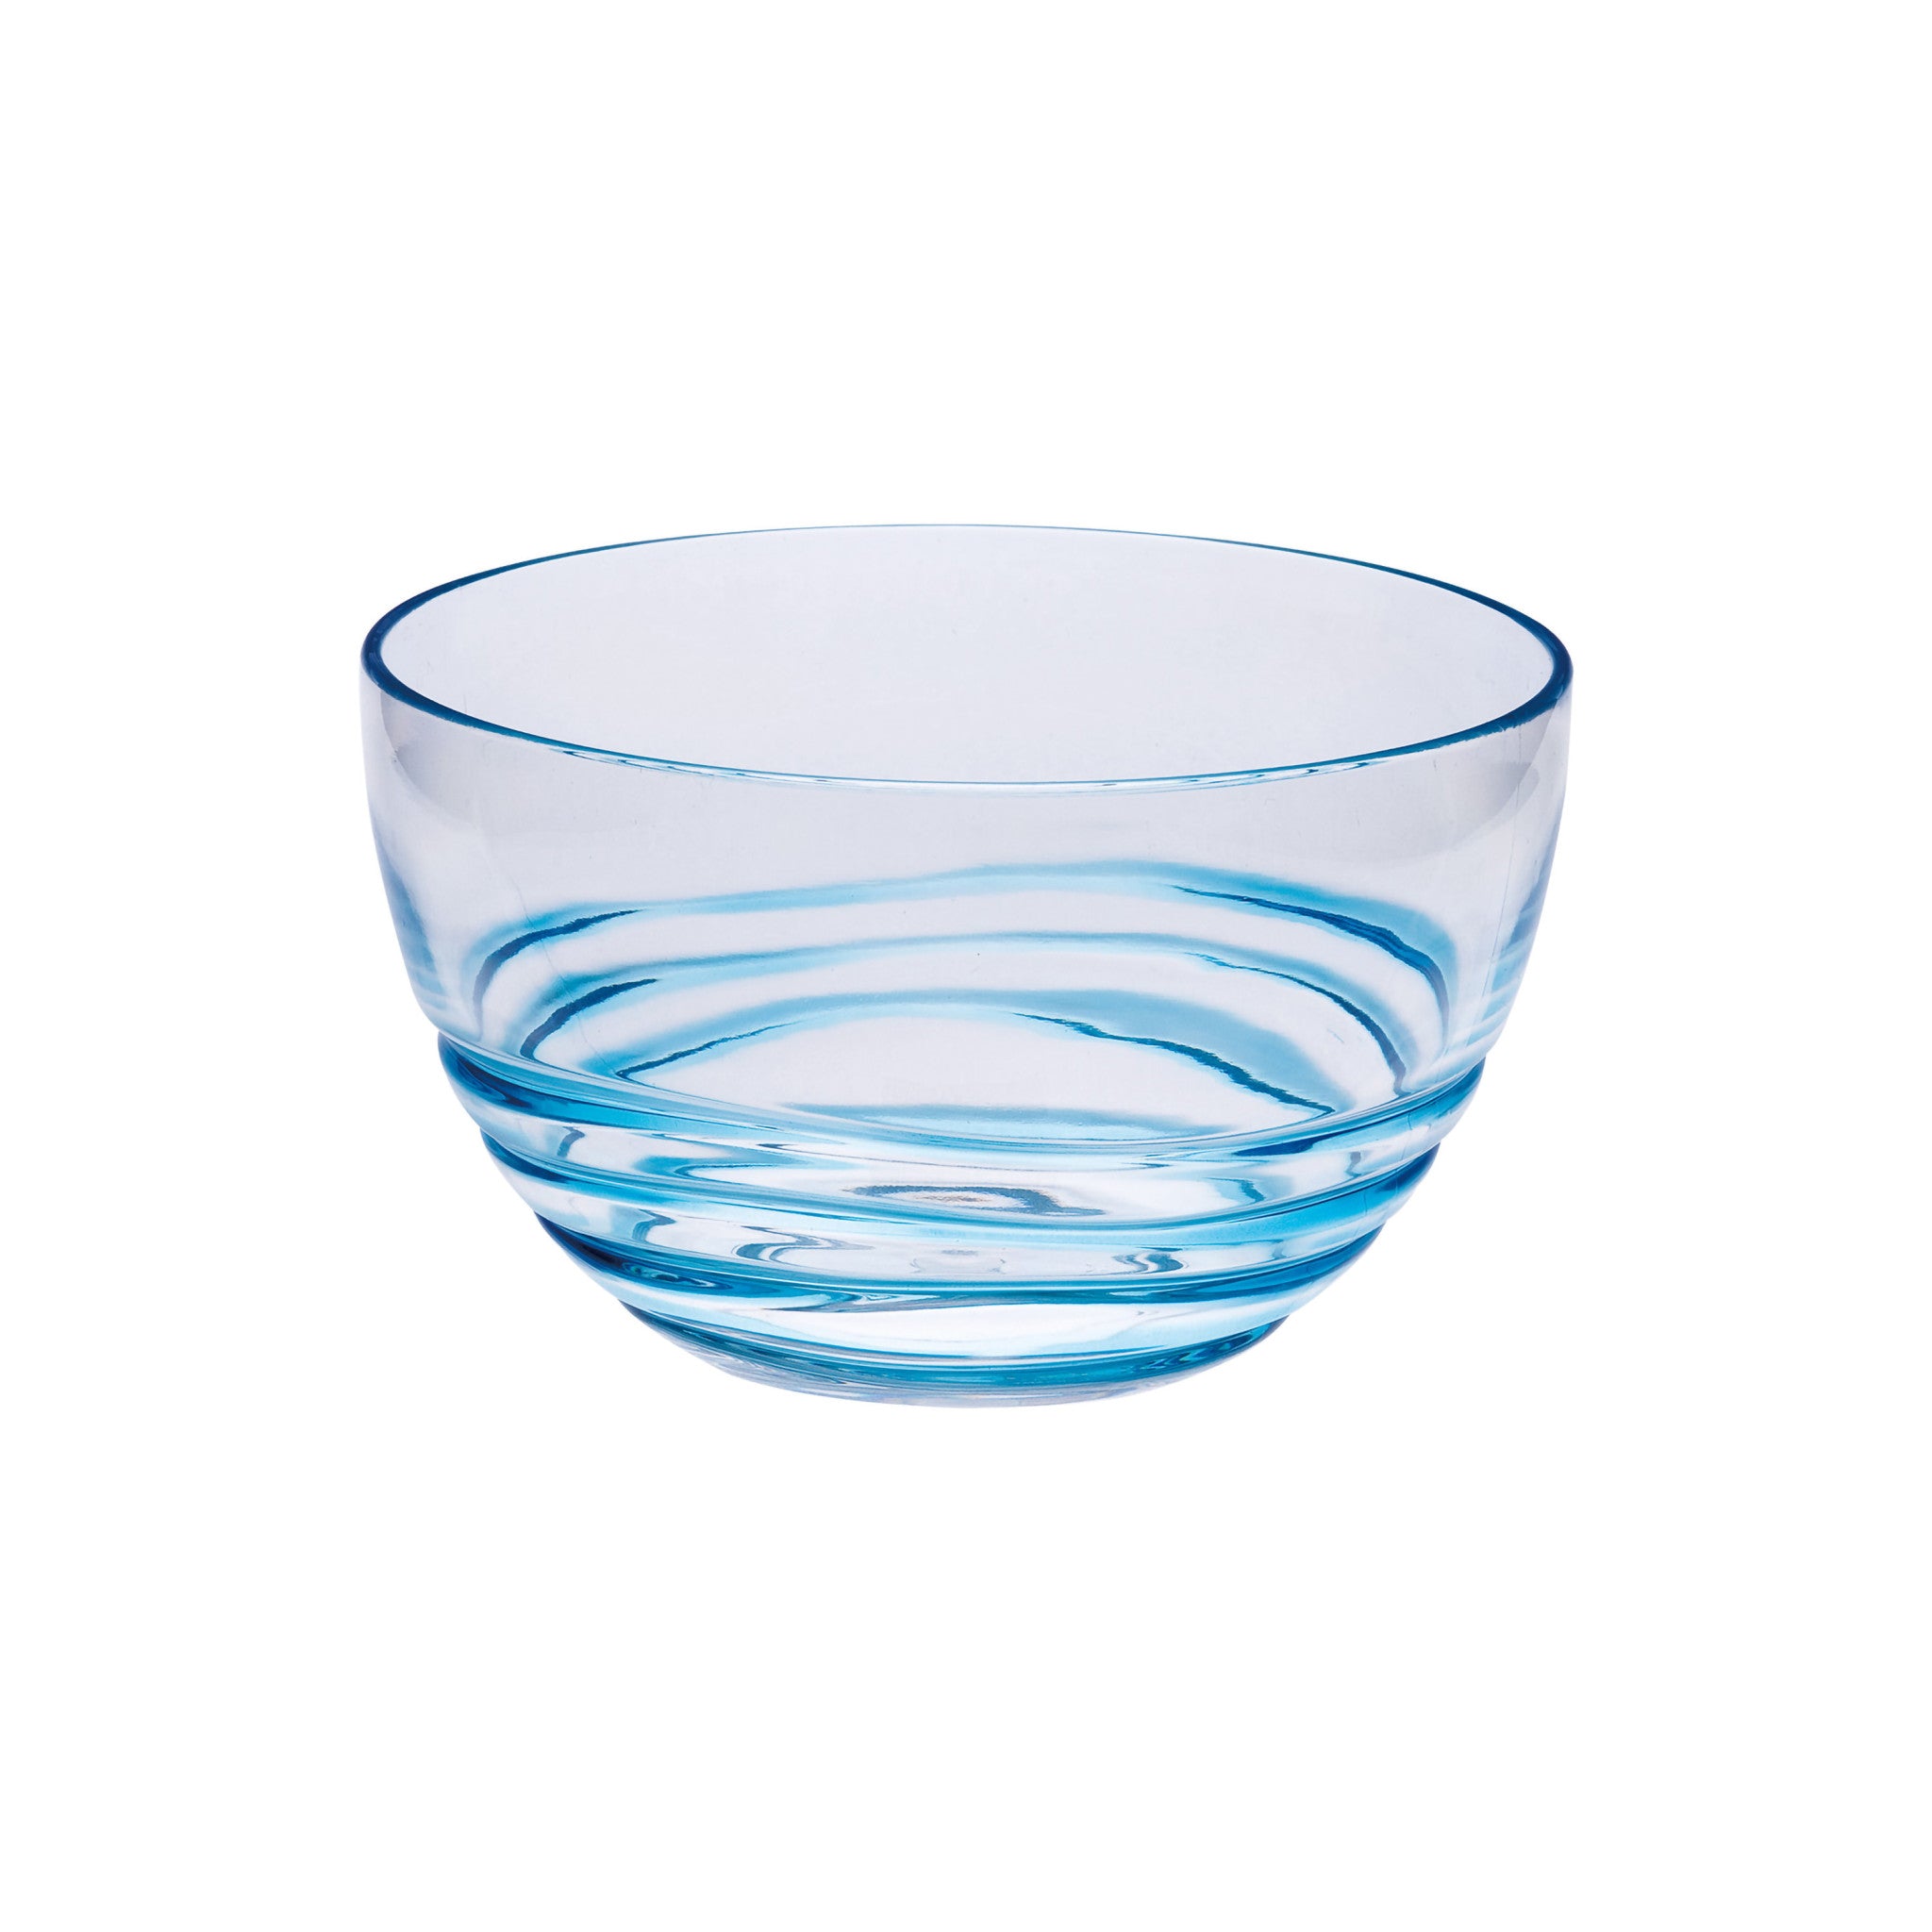 Clear and Blue Four Piece Swirl Acrylic Service For Four Bowl Set